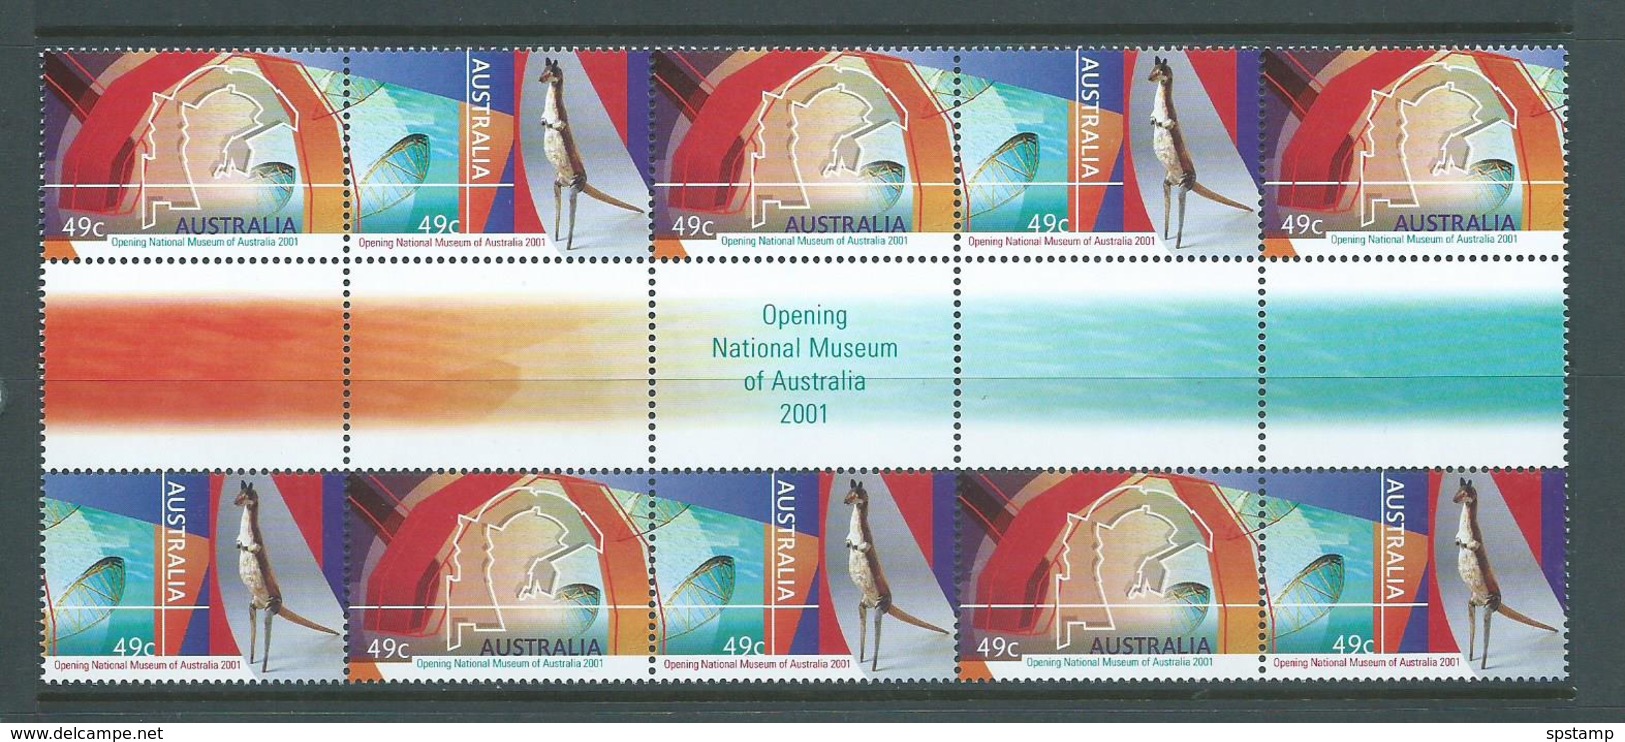 Australia 2001 National Museum Gutter Block Of 10 With Decorative Gutter MNH - Mint Stamps